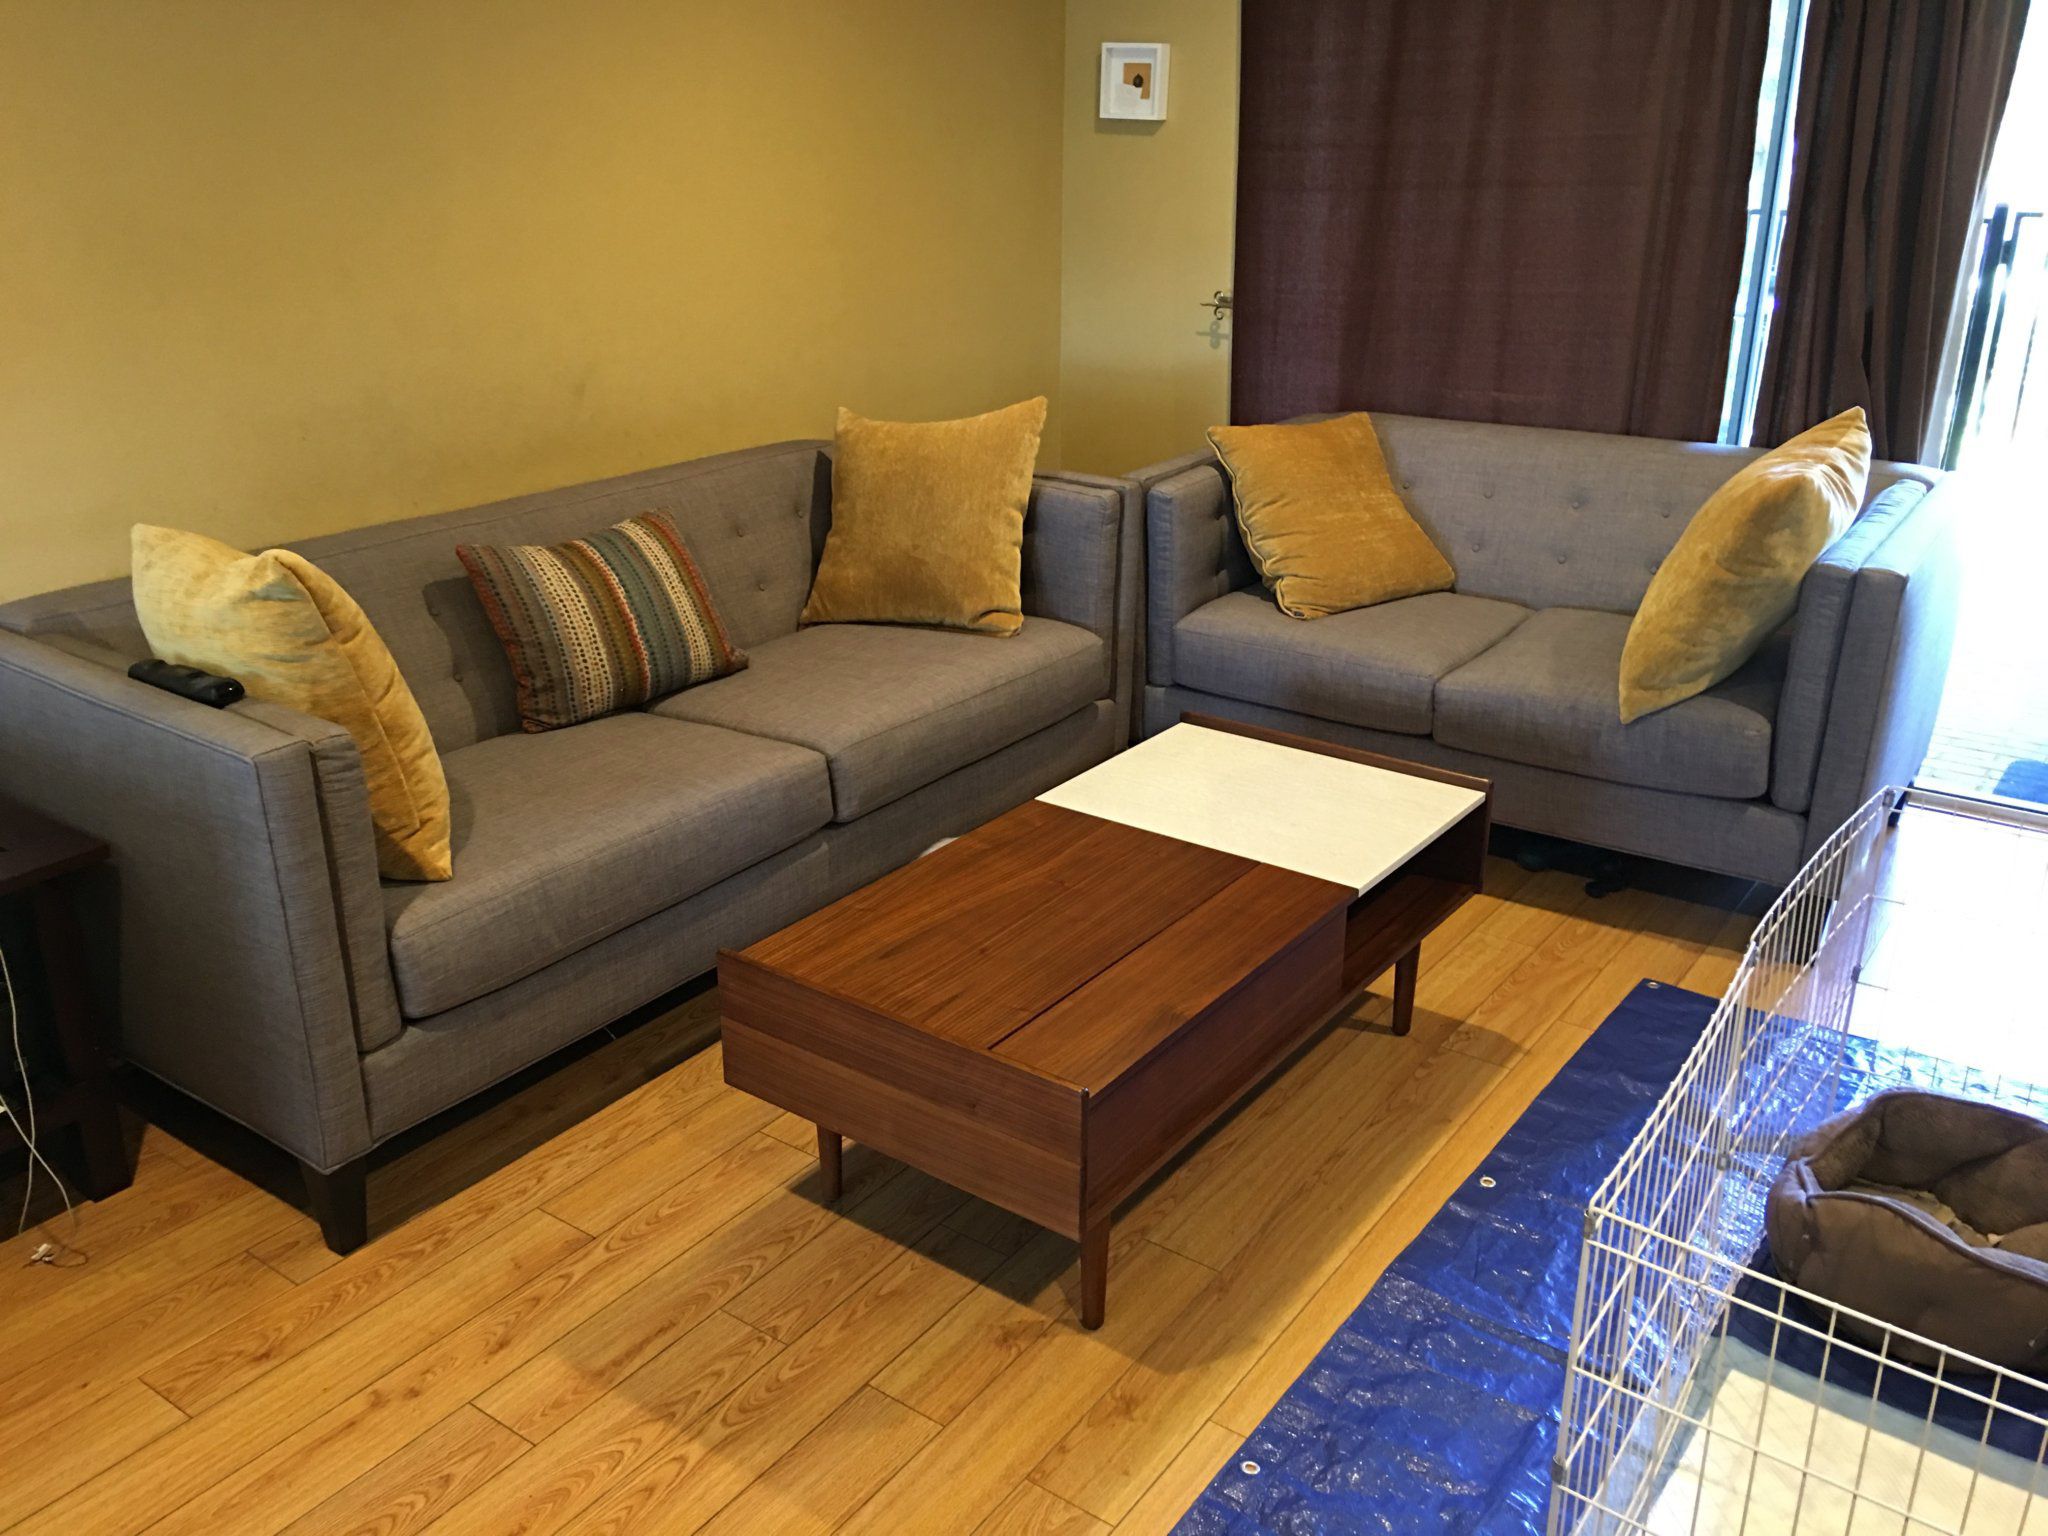 3 PIECE SOFA COUCH SET 